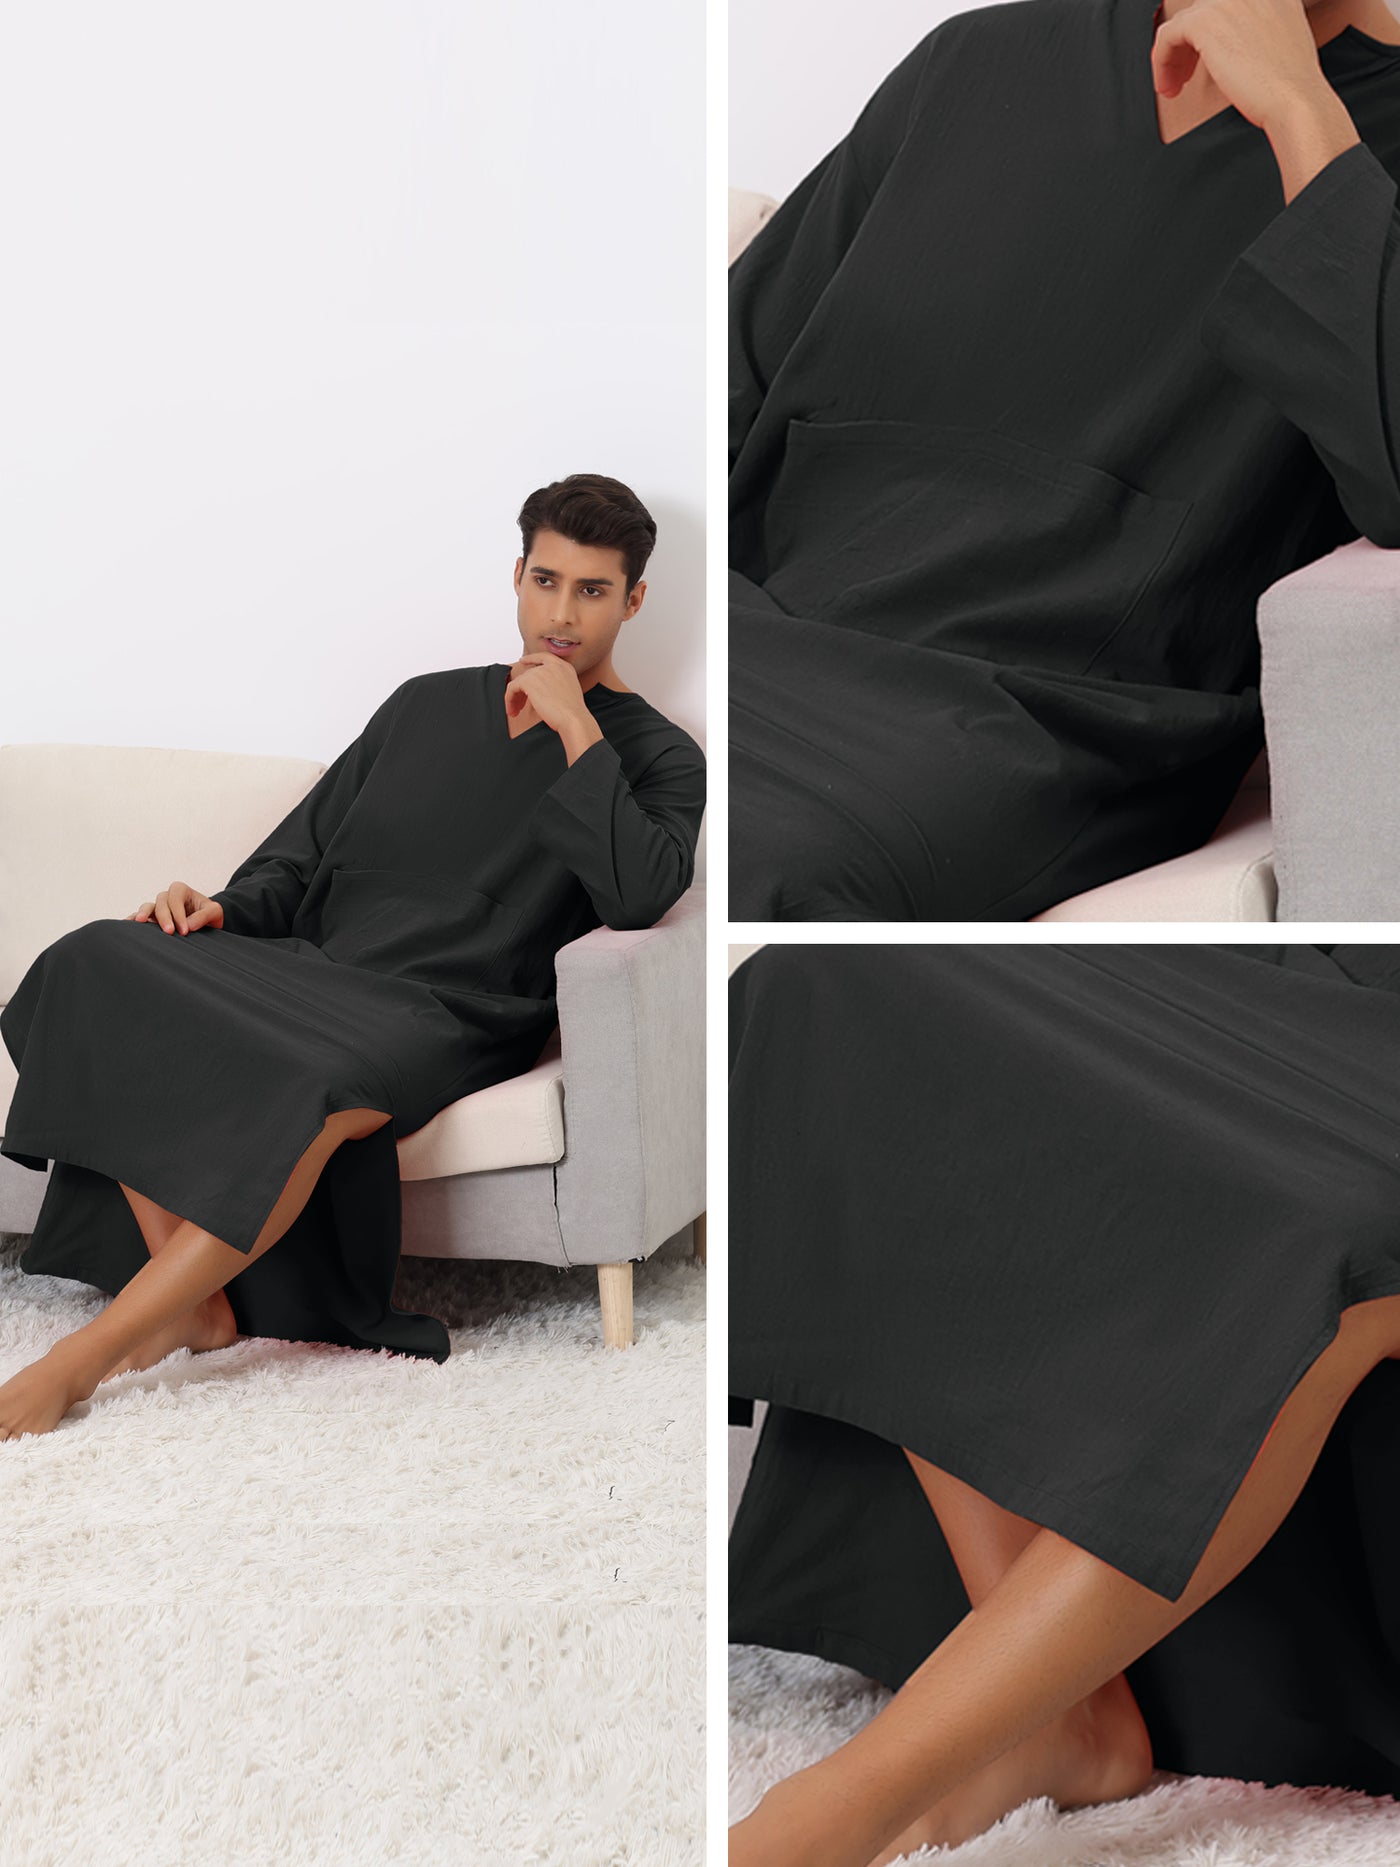 Bublédon Nightgown for Men's Loose Fit Sleepwear Long Sleeves V Neck Comfy Nightshirts